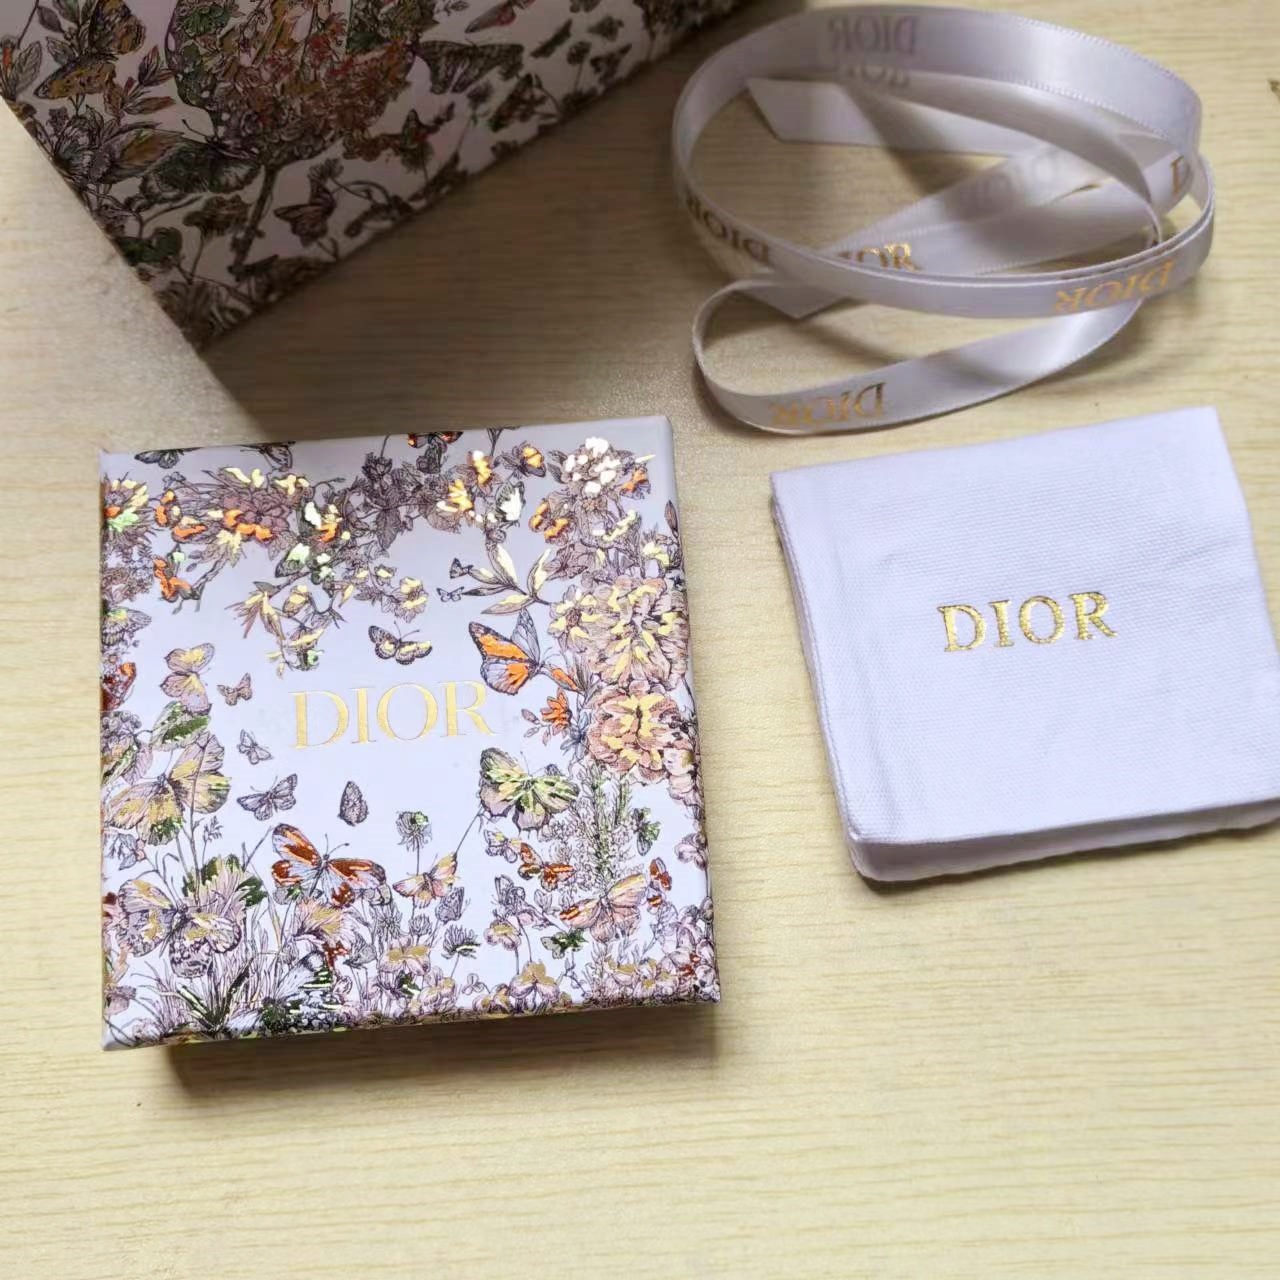 Dior jewelry box one set butterfly